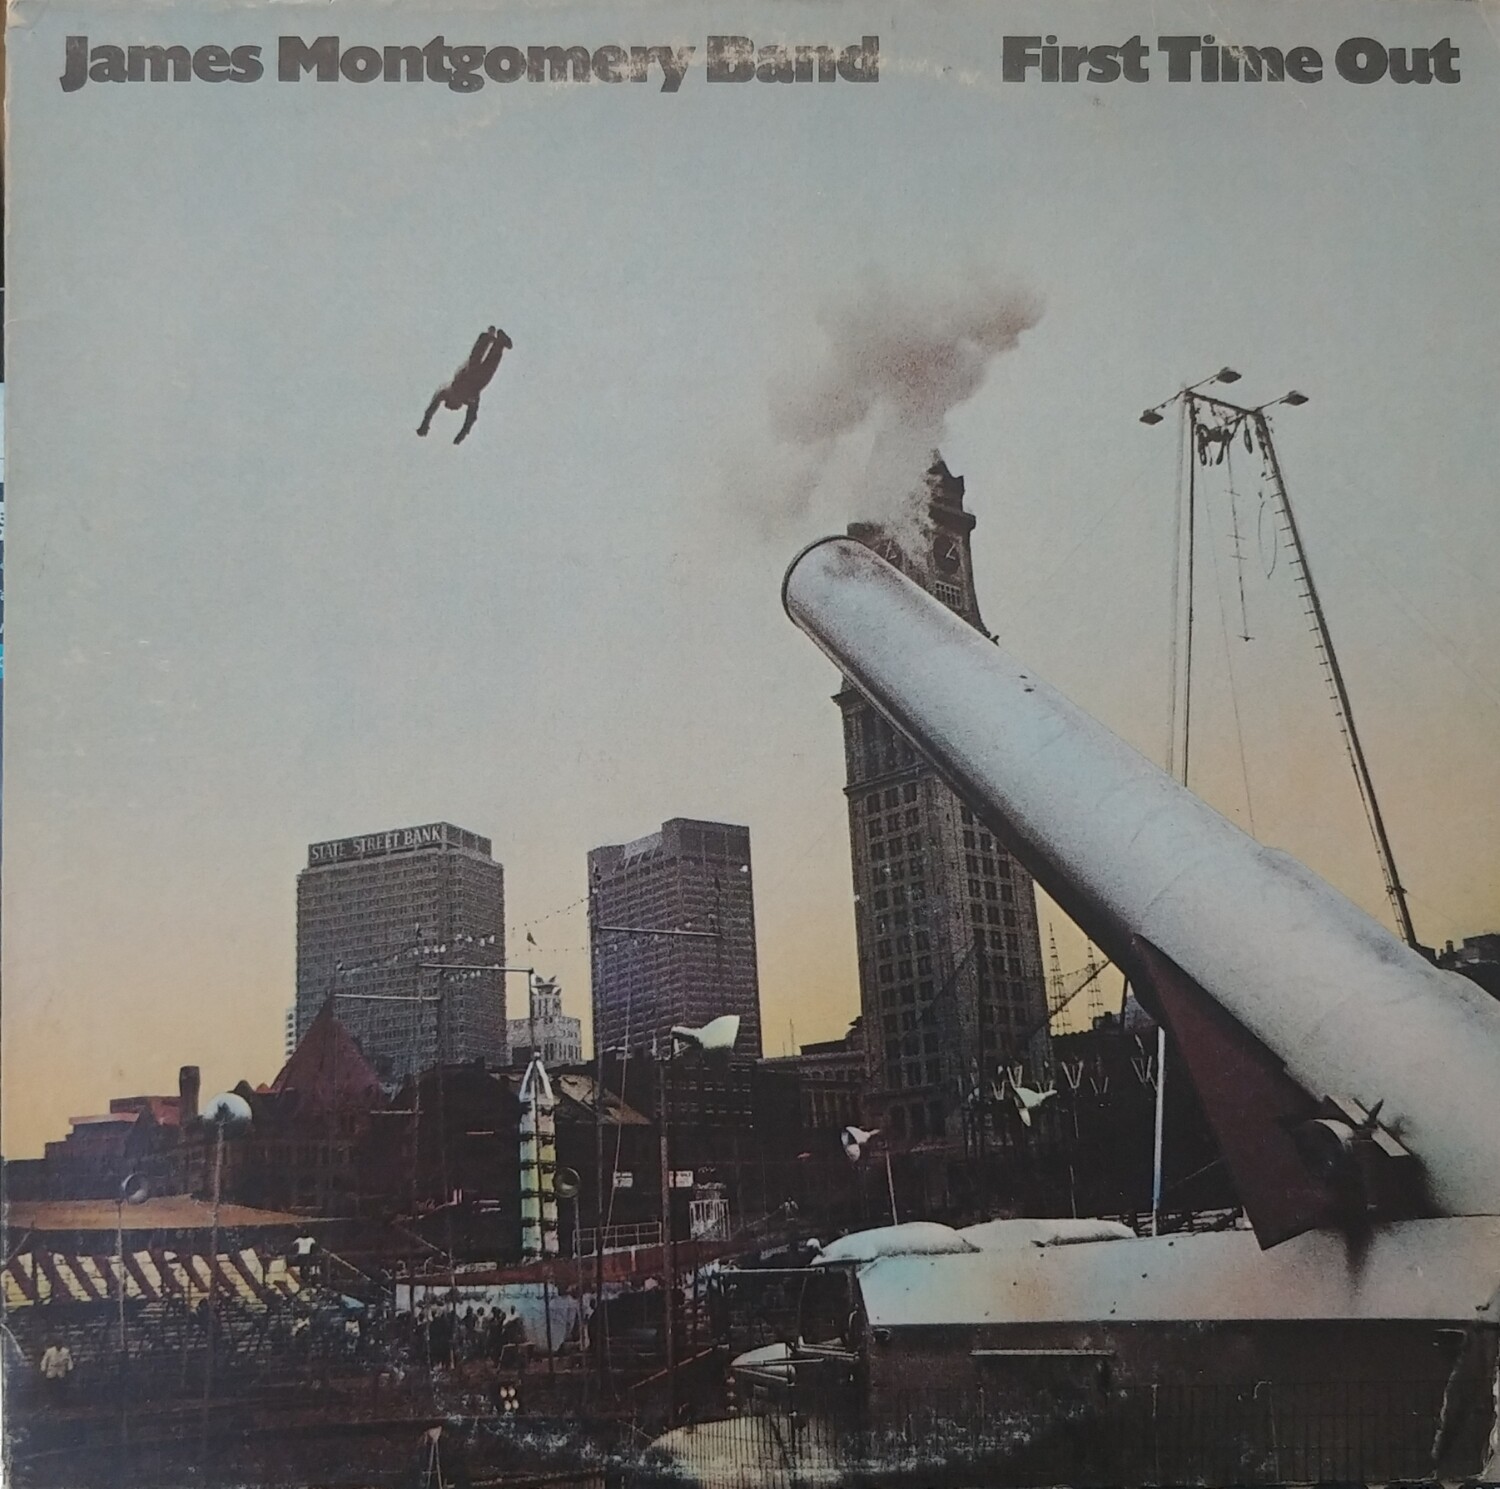 James Montgomery Band - First time out